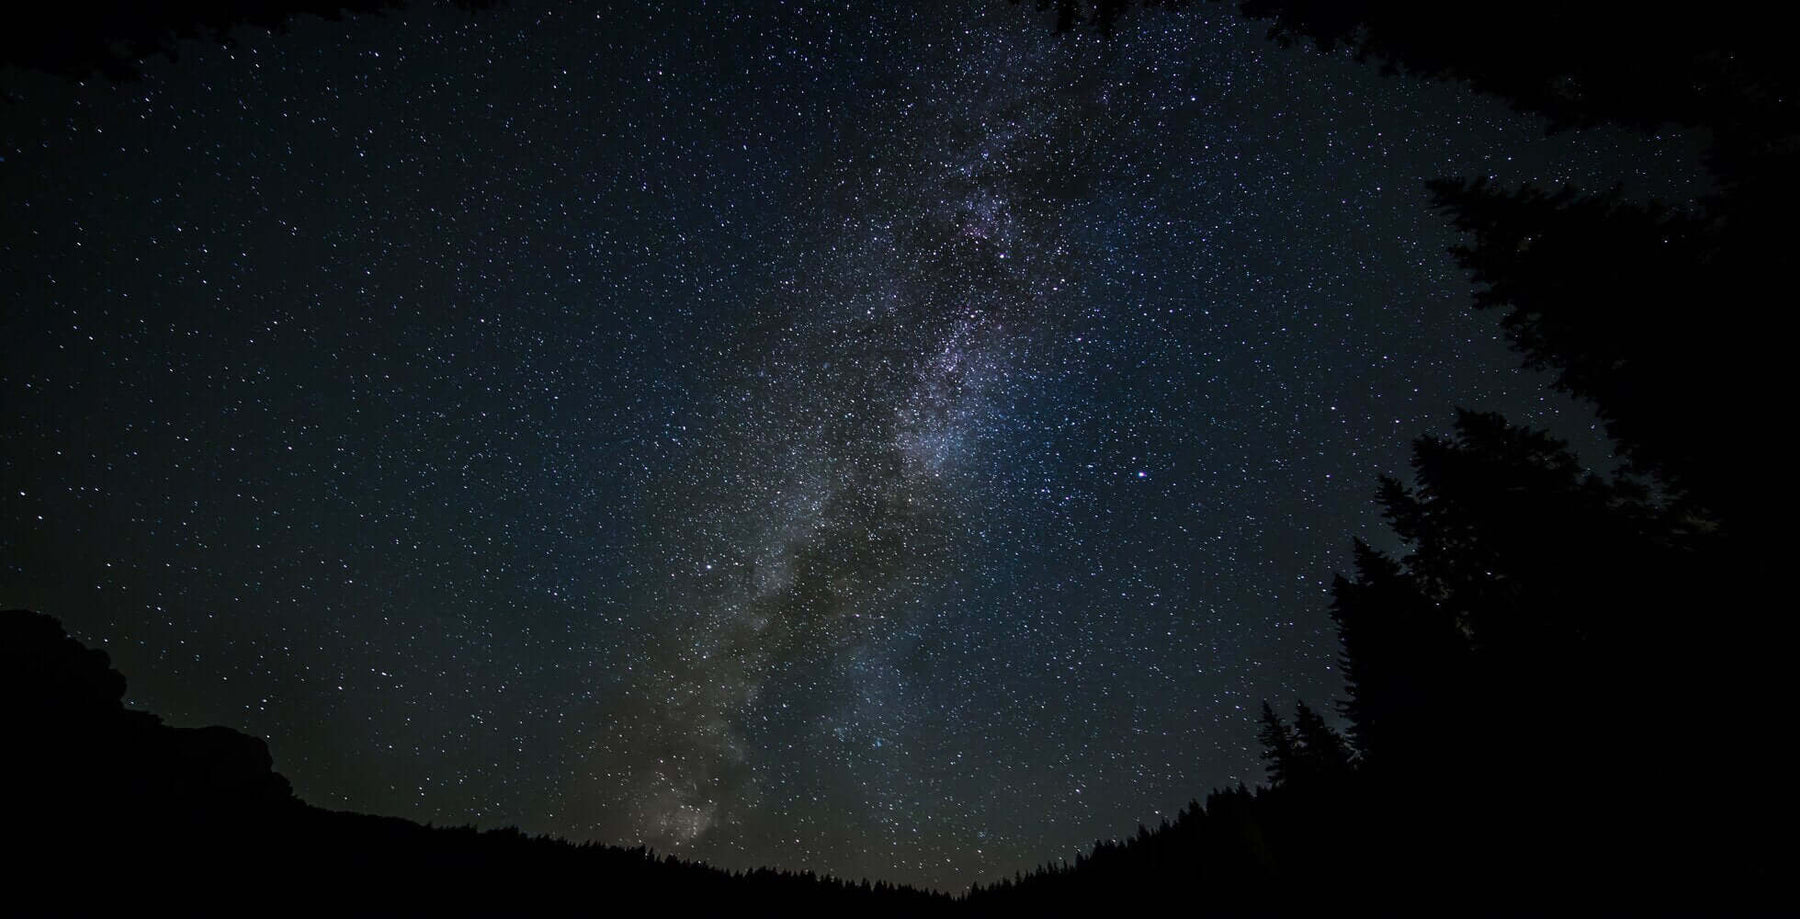 Milky way majesty at stargazing campgrounds